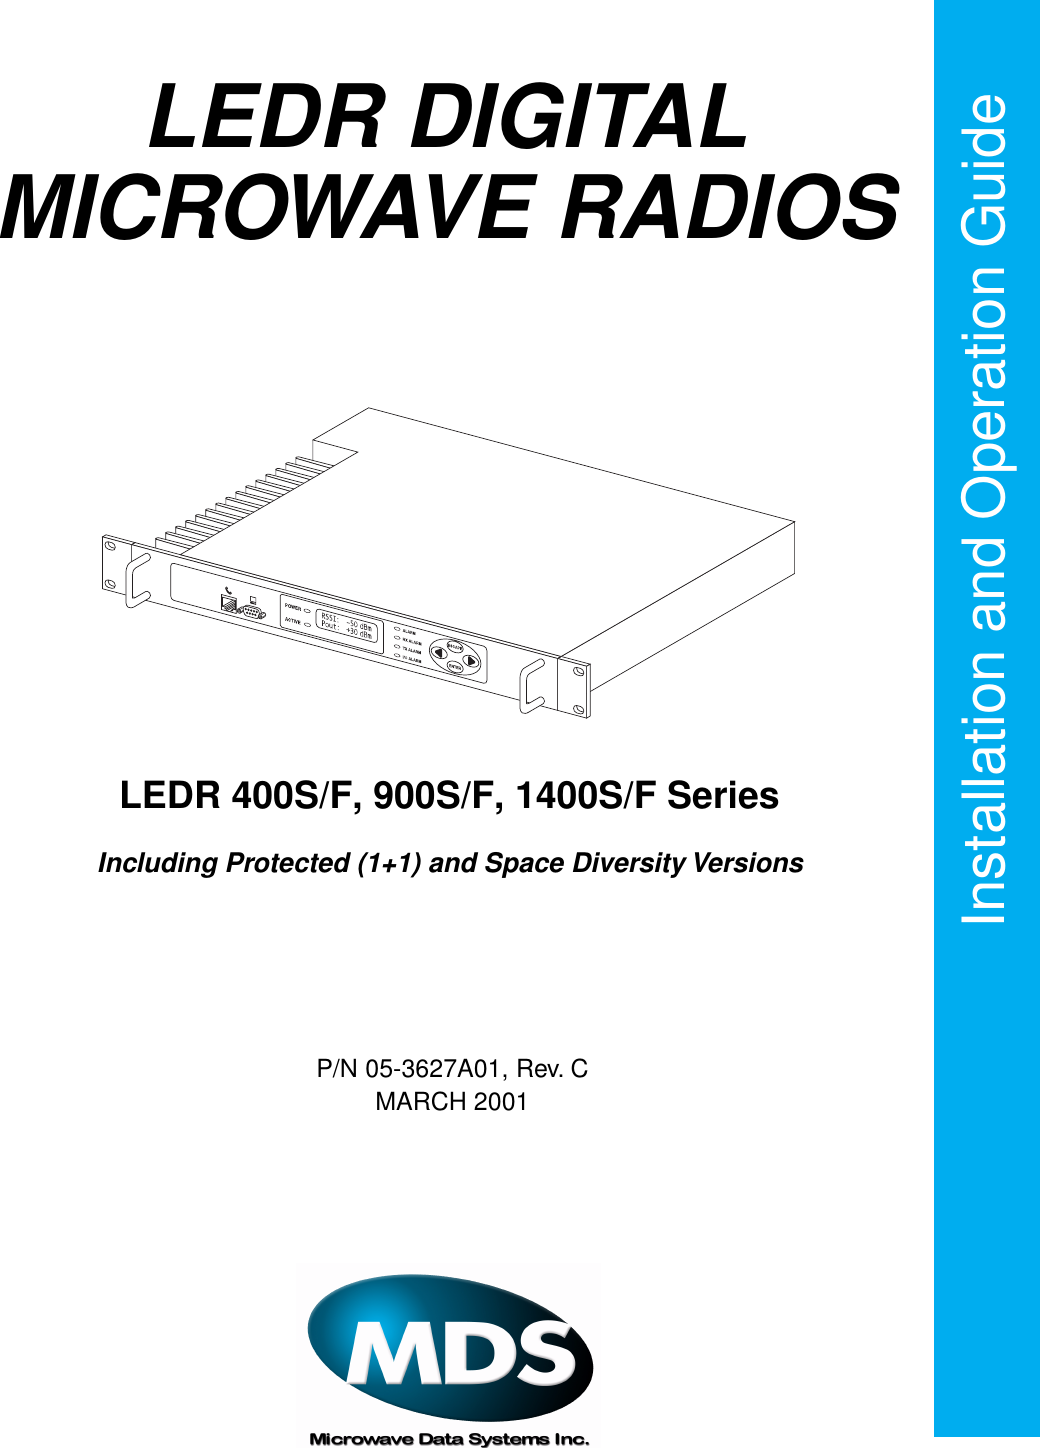  Installation and Operation Guide P/N 05-3627A01, Rev. CMARCH 2001 LEDR 400S/F, 900S/F, 1400S/F Series Including Protected (1+1) and Space Diversity Versions LEDR DIGITAL MICROWAVE RADIOS